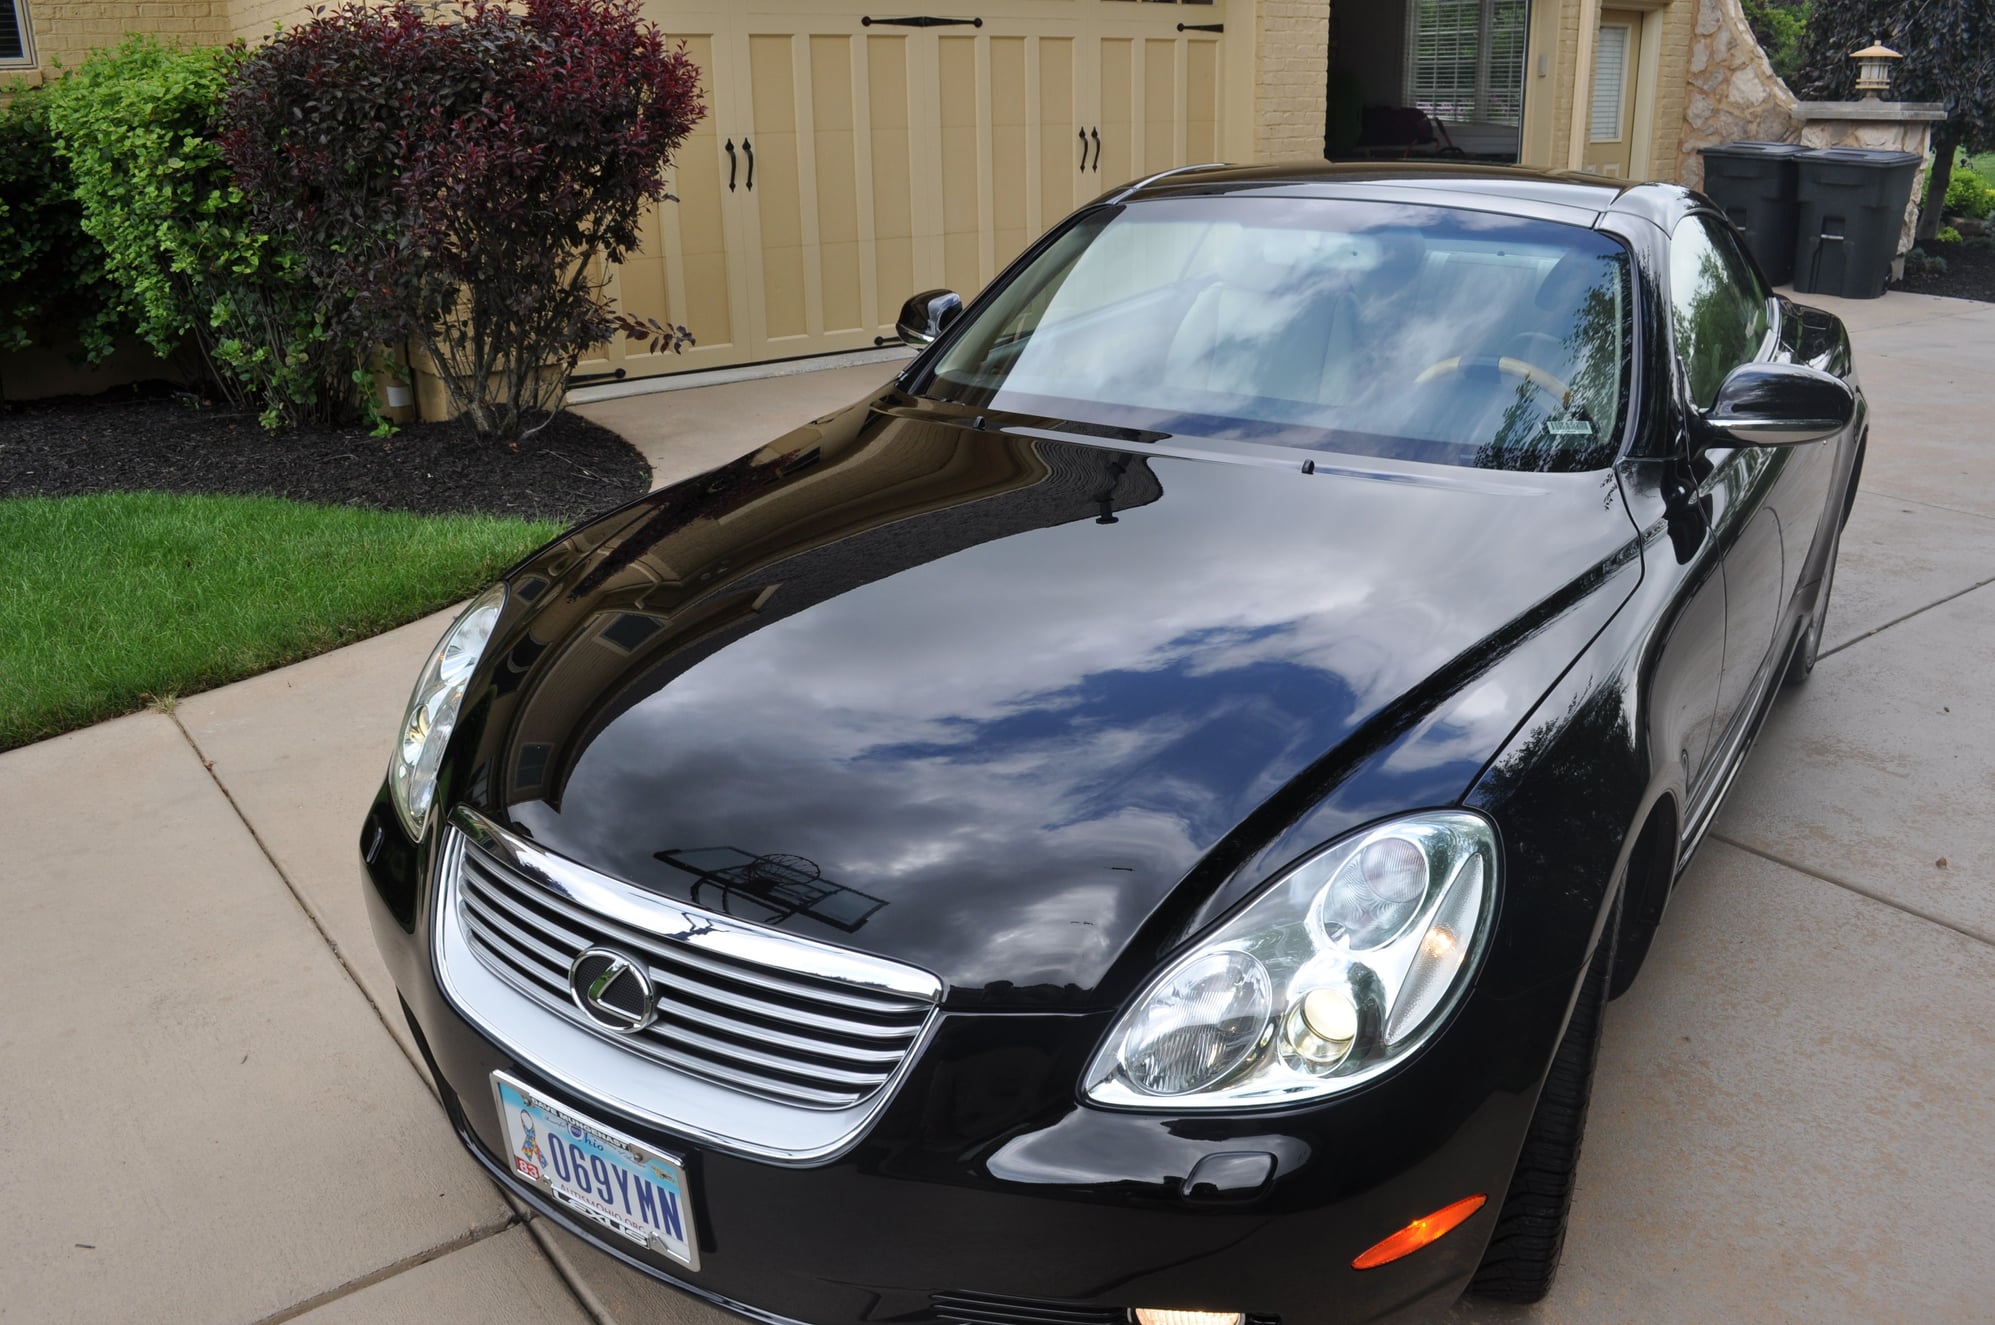 2002 Lexus SC430 - OH:  2002 Lexus SC430 Convertible - 55k miles - Used - VIN JTHFN48Y220029515 - 55,000 Miles - 8 cyl - 2WD - Automatic - Convertible - Black - Mason, OH 45040, United States